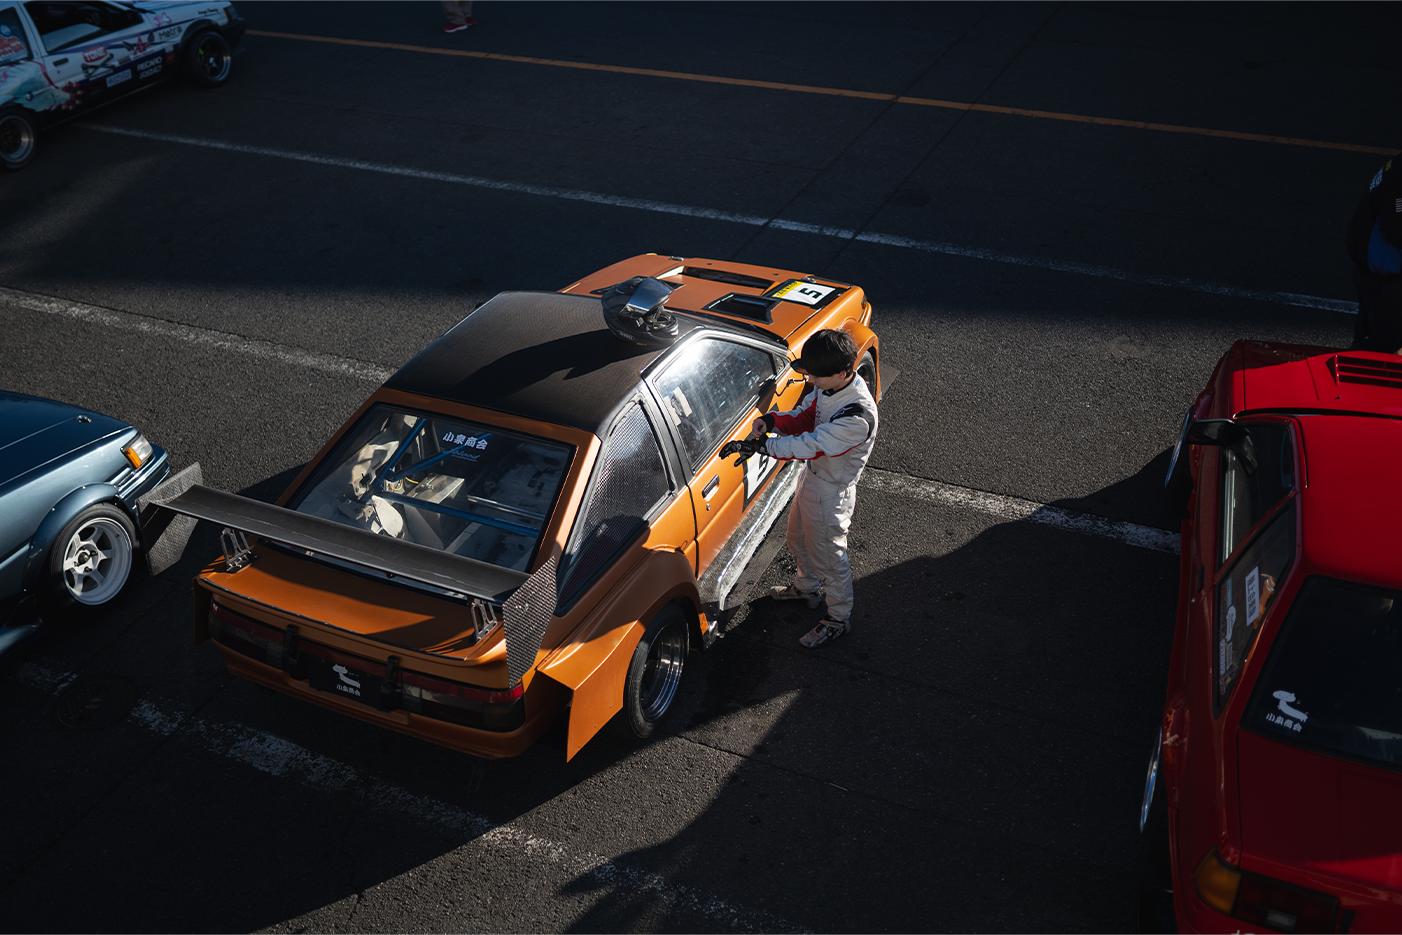 Time Attack AE86 From Above at Tsukuba